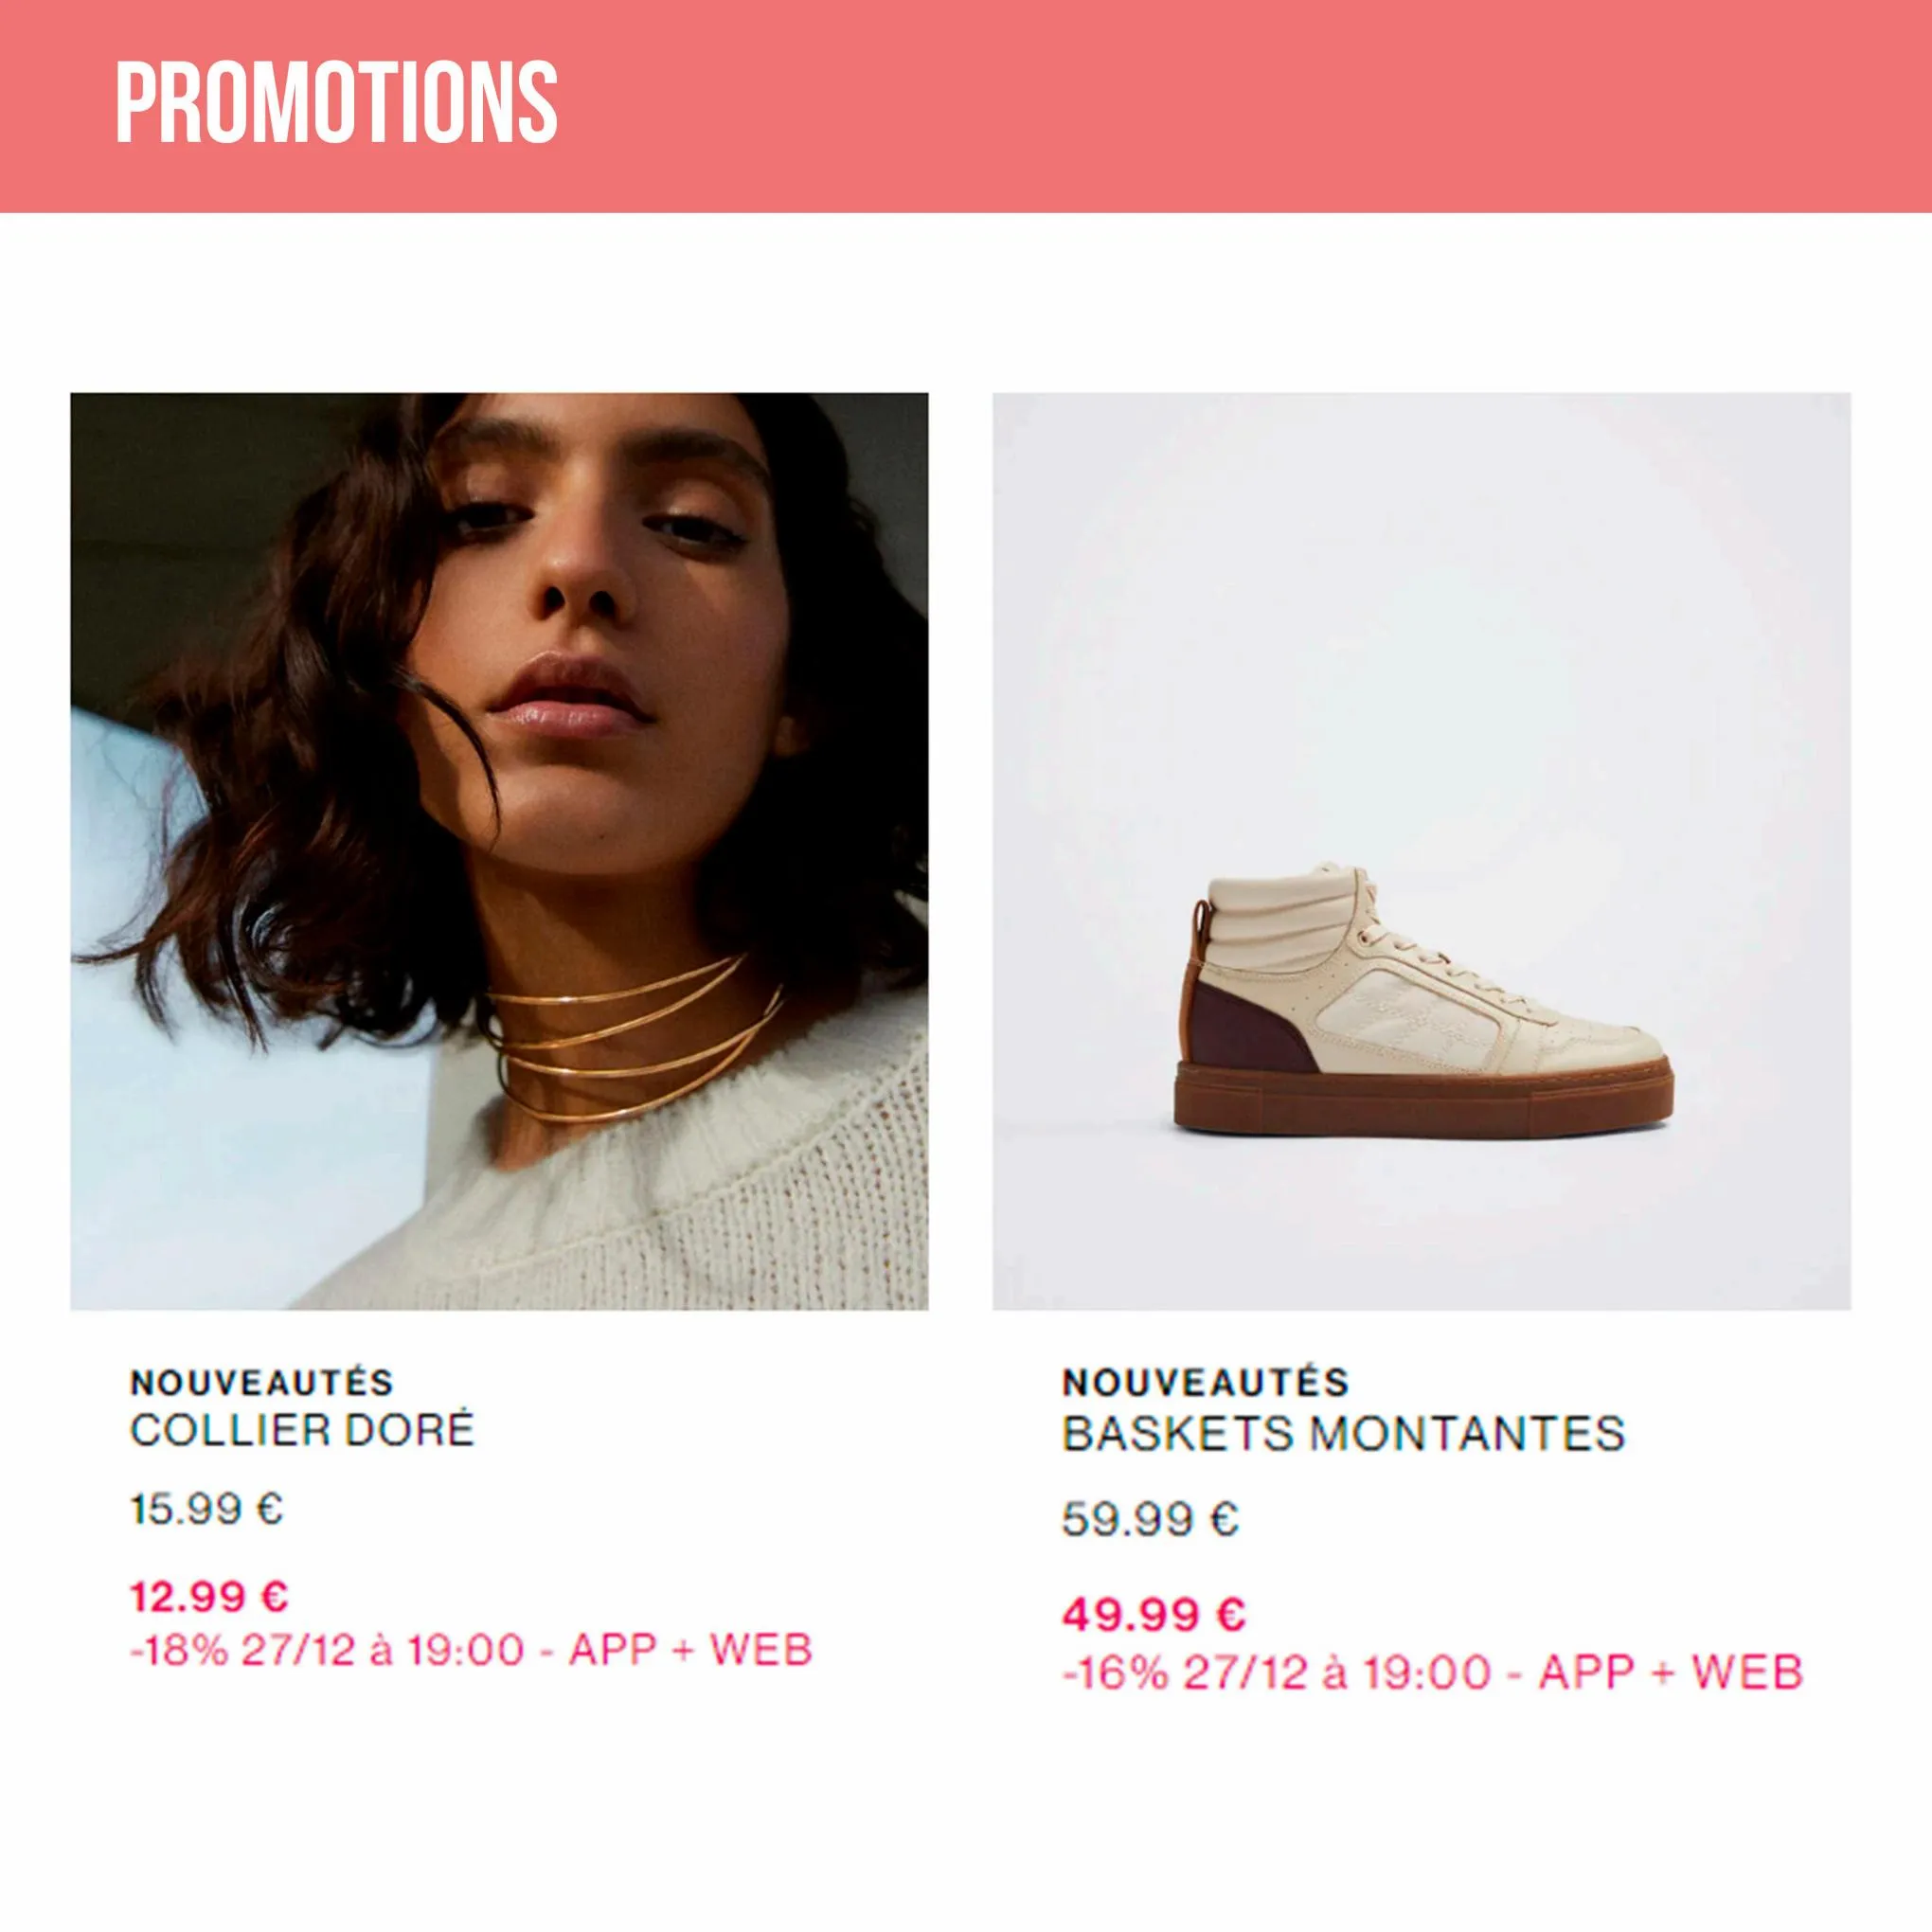 Catalogue Promotions, page 00008